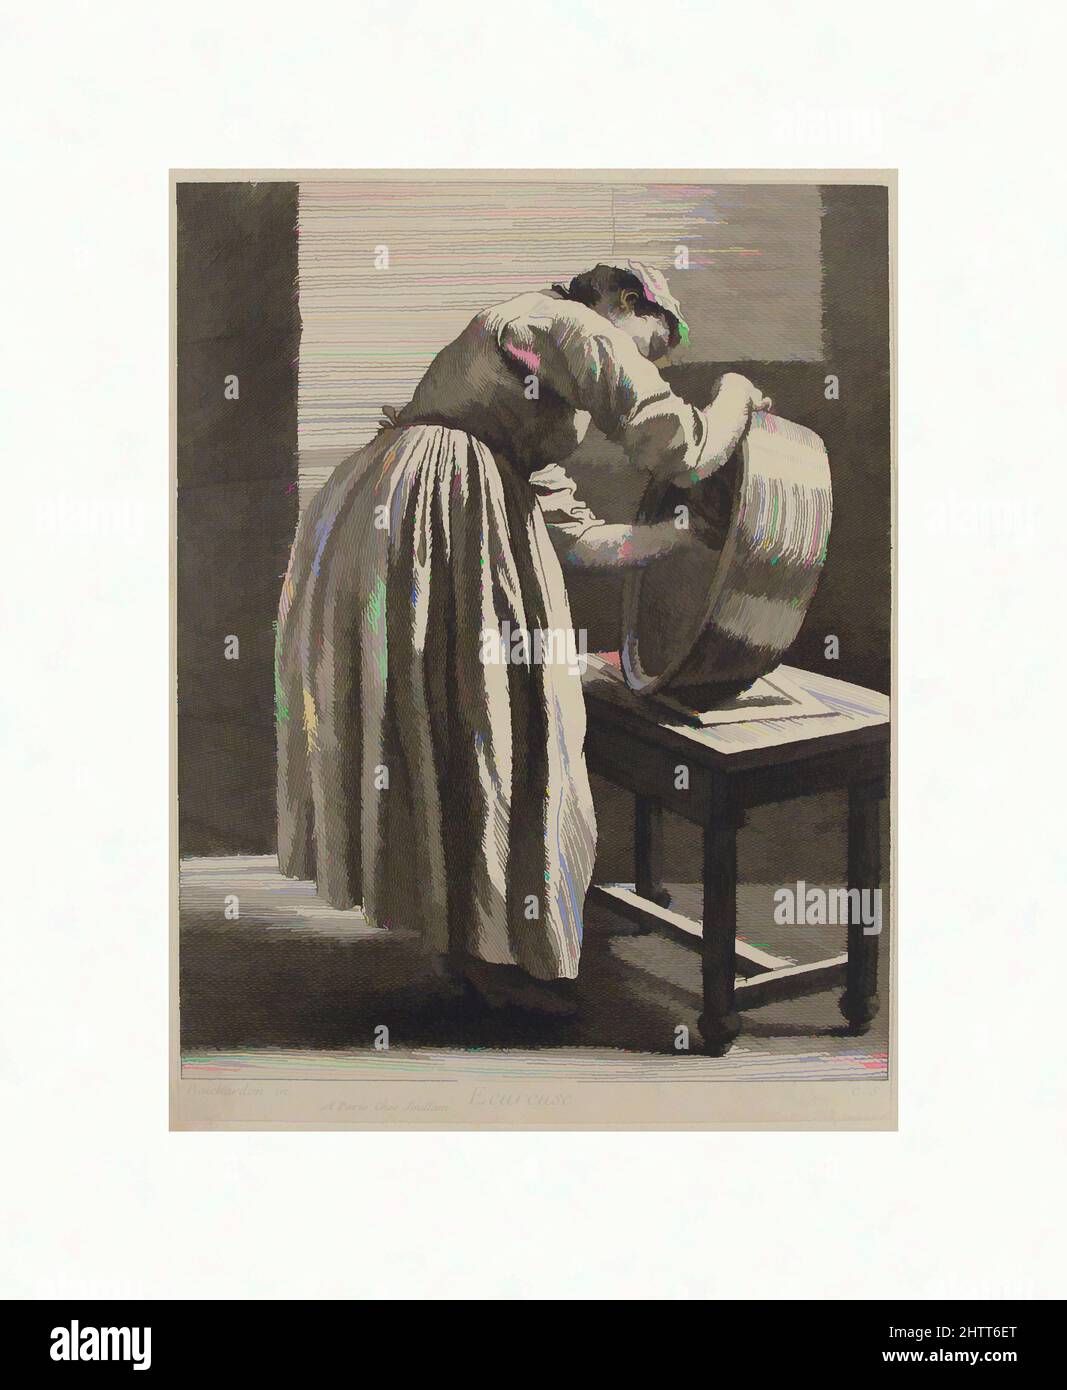 Art inspired by Scullery Maid, 1737, Etching with some engraving, sheet: 9 1/4 x 7 1/16 in. (23.5 x 18 cm), Prints, After Edme Bouchardon (French, Chaumont 1698–1762 Paris), Anne Claude Philippe de Tubières, comte de Caylus (French, Paris 1692–1765 Paris, Classic works modernized by Artotop with a splash of modernity. Shapes, color and value, eye-catching visual impact on art. Emotions through freedom of artworks in a contemporary way. A timeless message pursuing a wildly creative new direction. Artists turning to the digital medium and creating the Artotop NFT Stock Photo